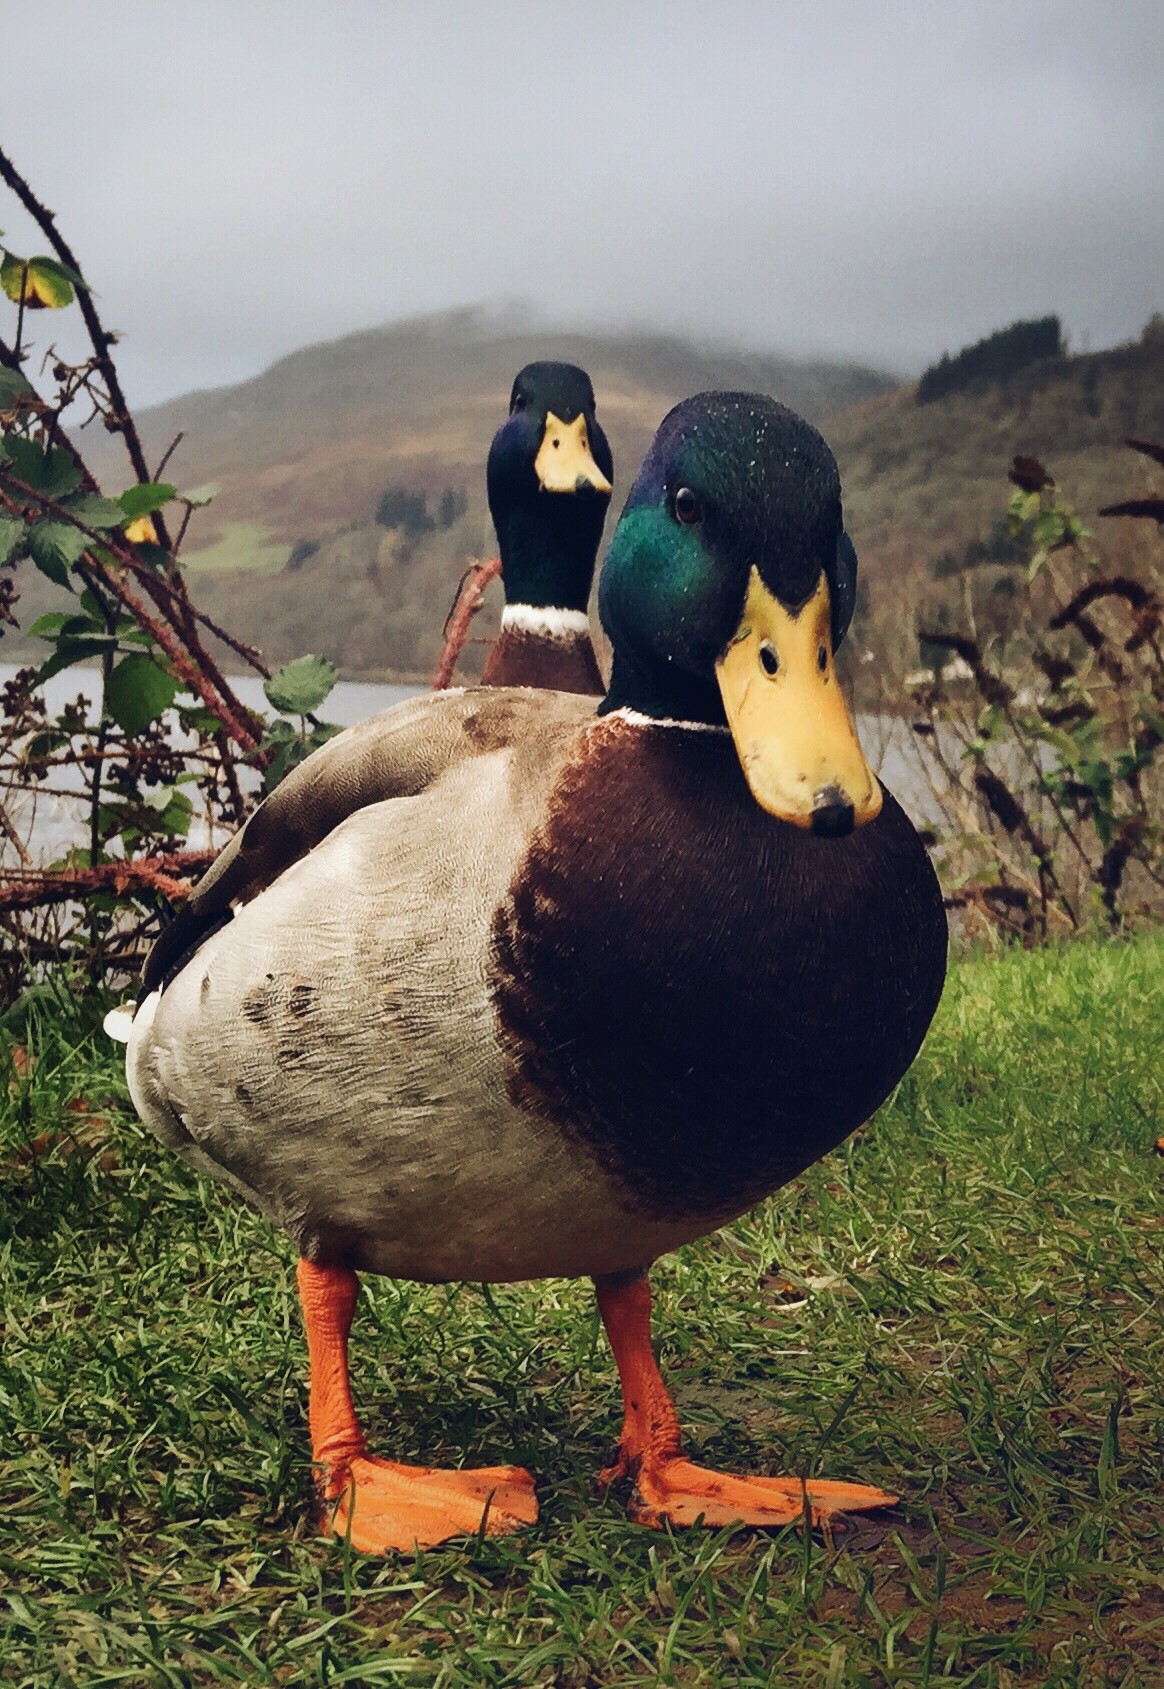 BEWARE of the Two Headed duck of St. Fillans.  He does not like selfies! @kristyashton